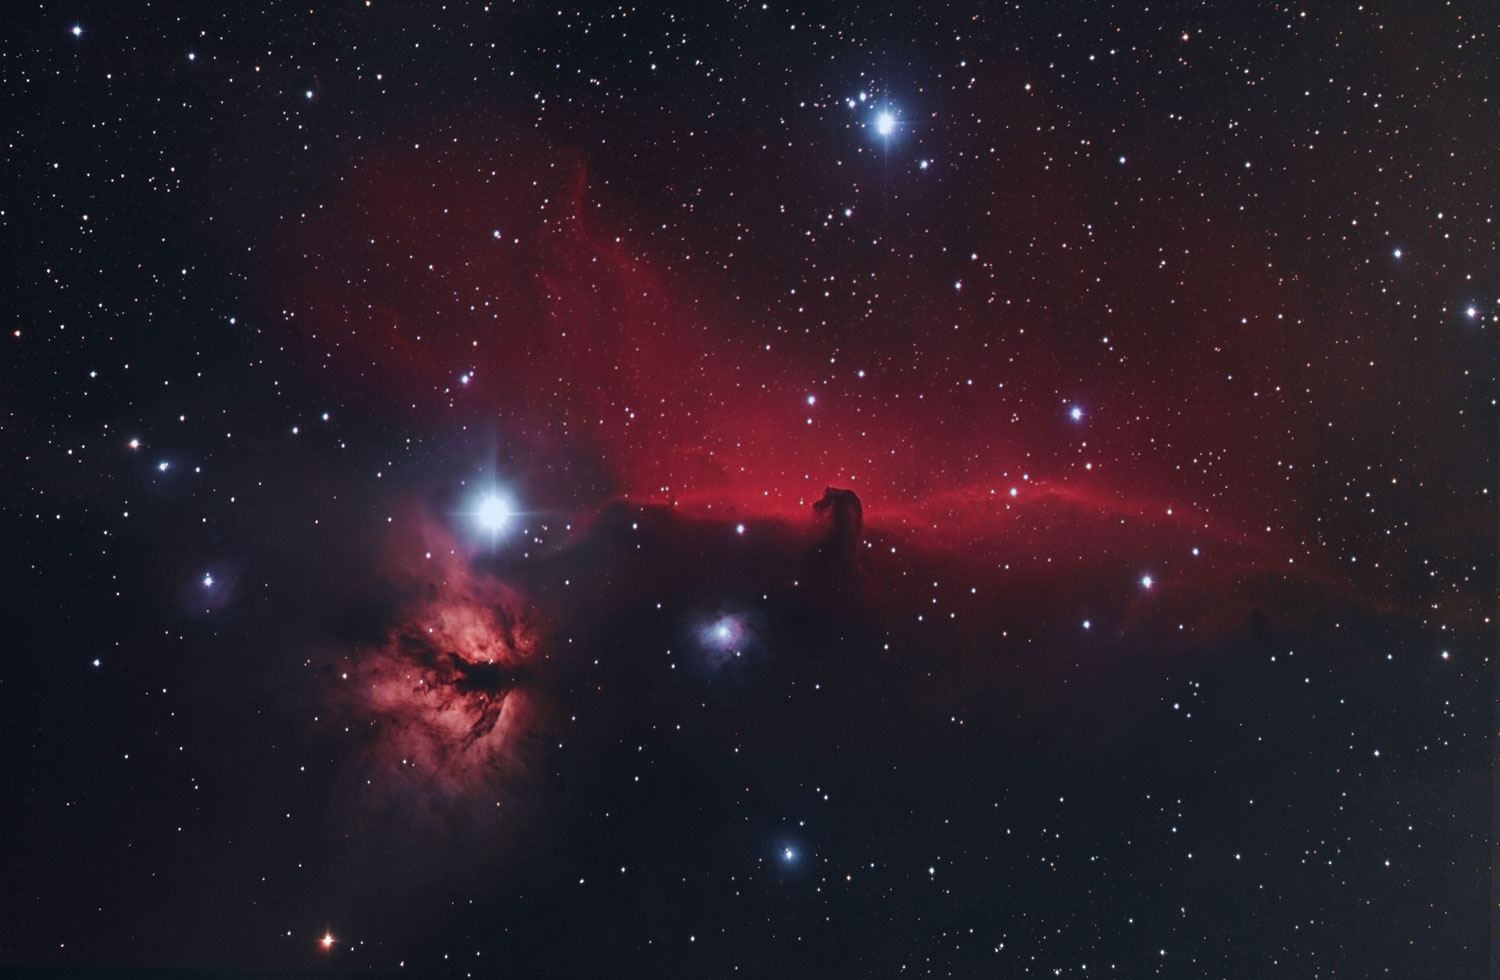 The Horsehead nebula, also known as Barnard 33 in emission nebula IC 434, taken at Seneca and Oswego in Illinois, Feb.-March 2014